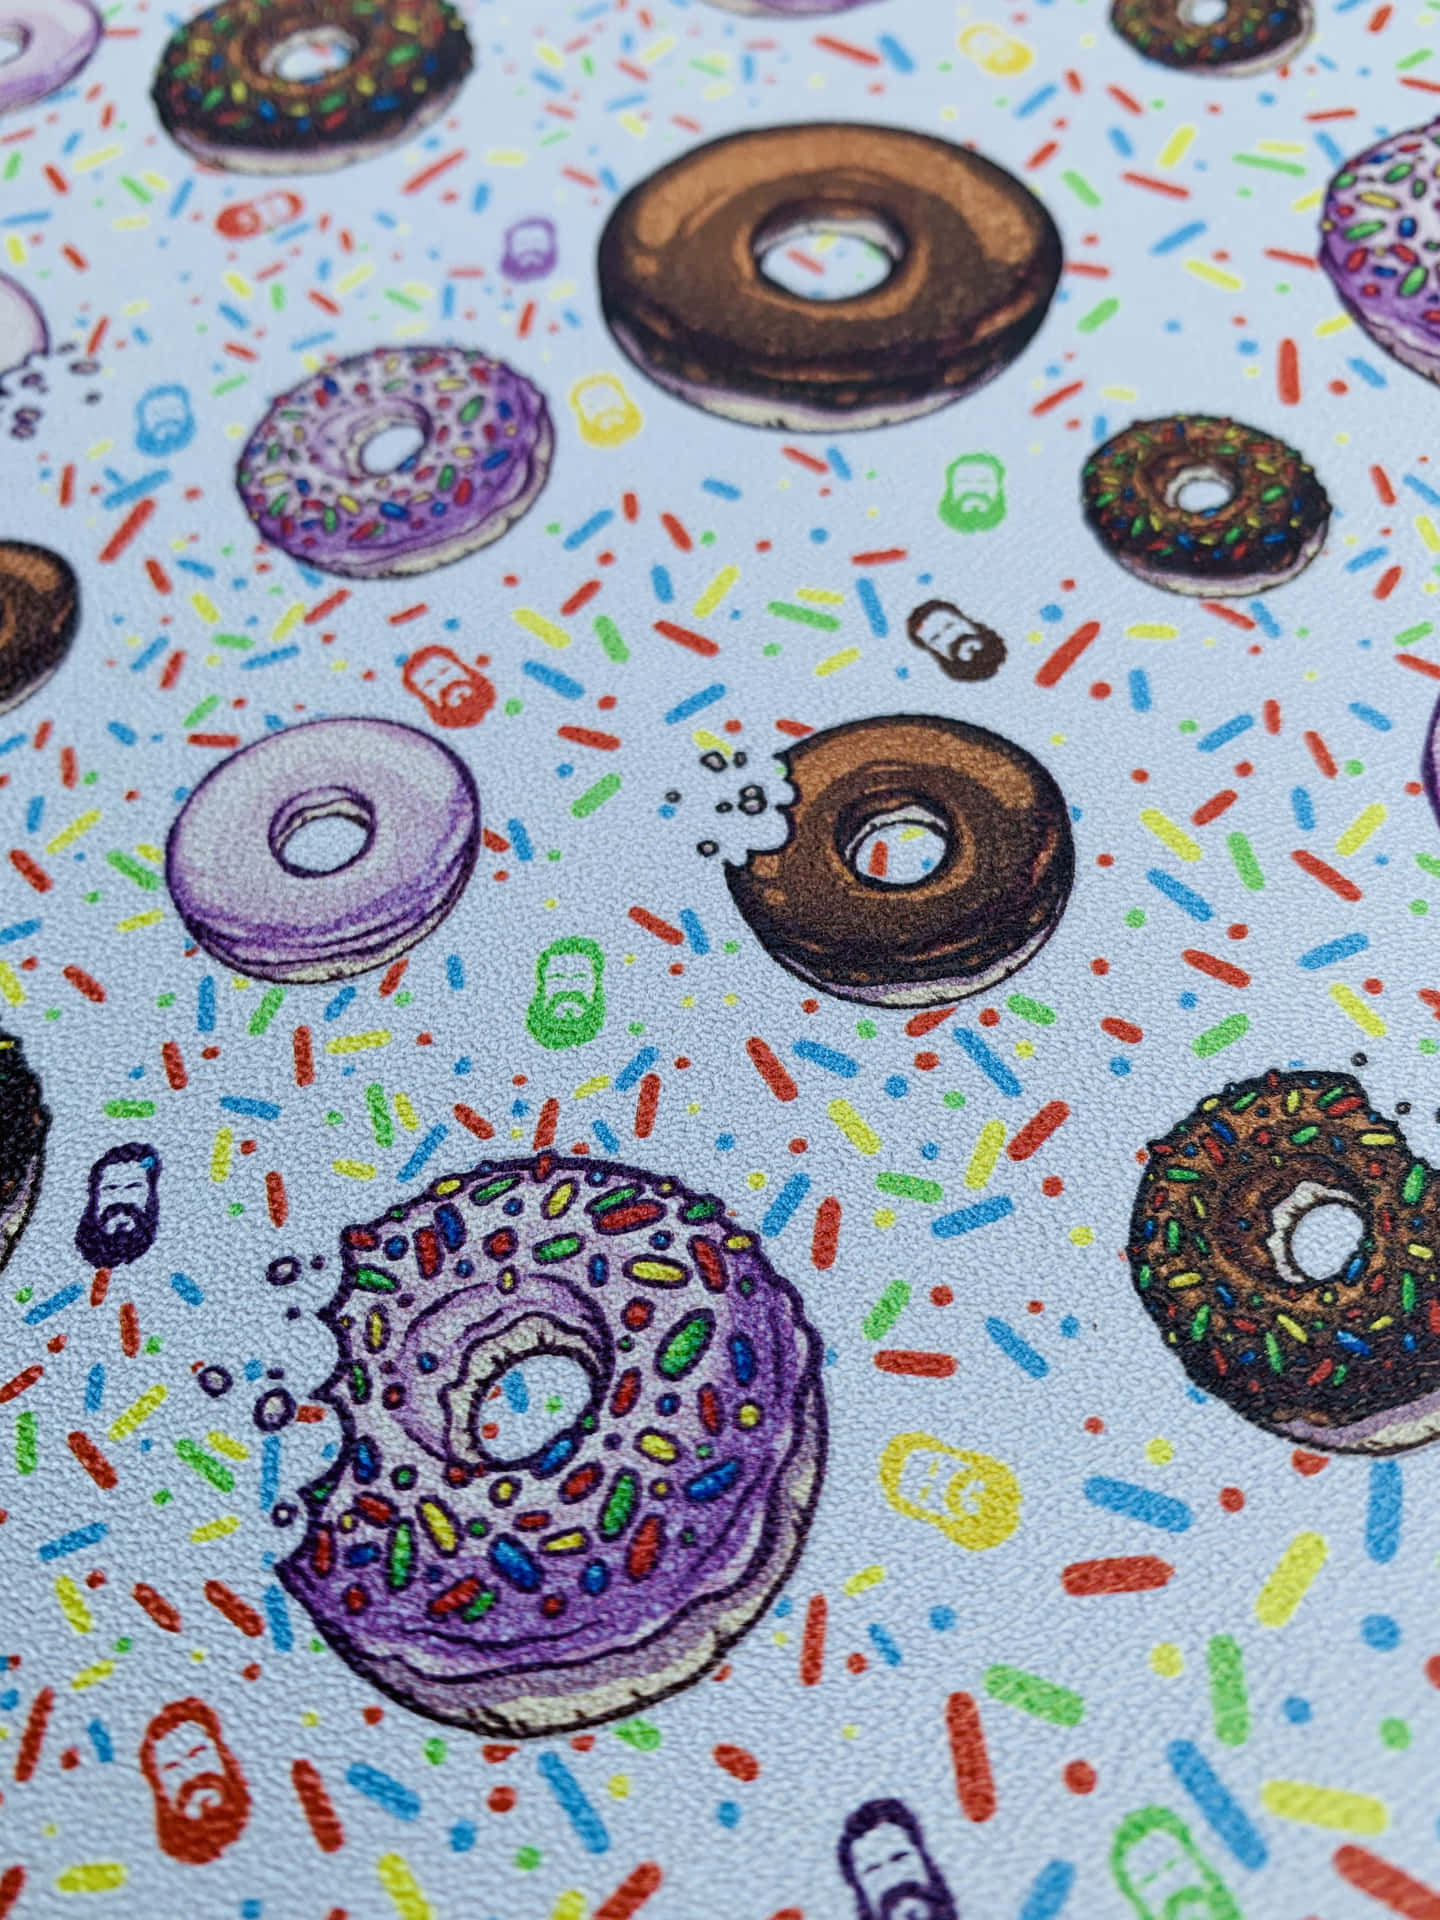 Irresistibly Cute Donut with Sprinkles Wallpaper